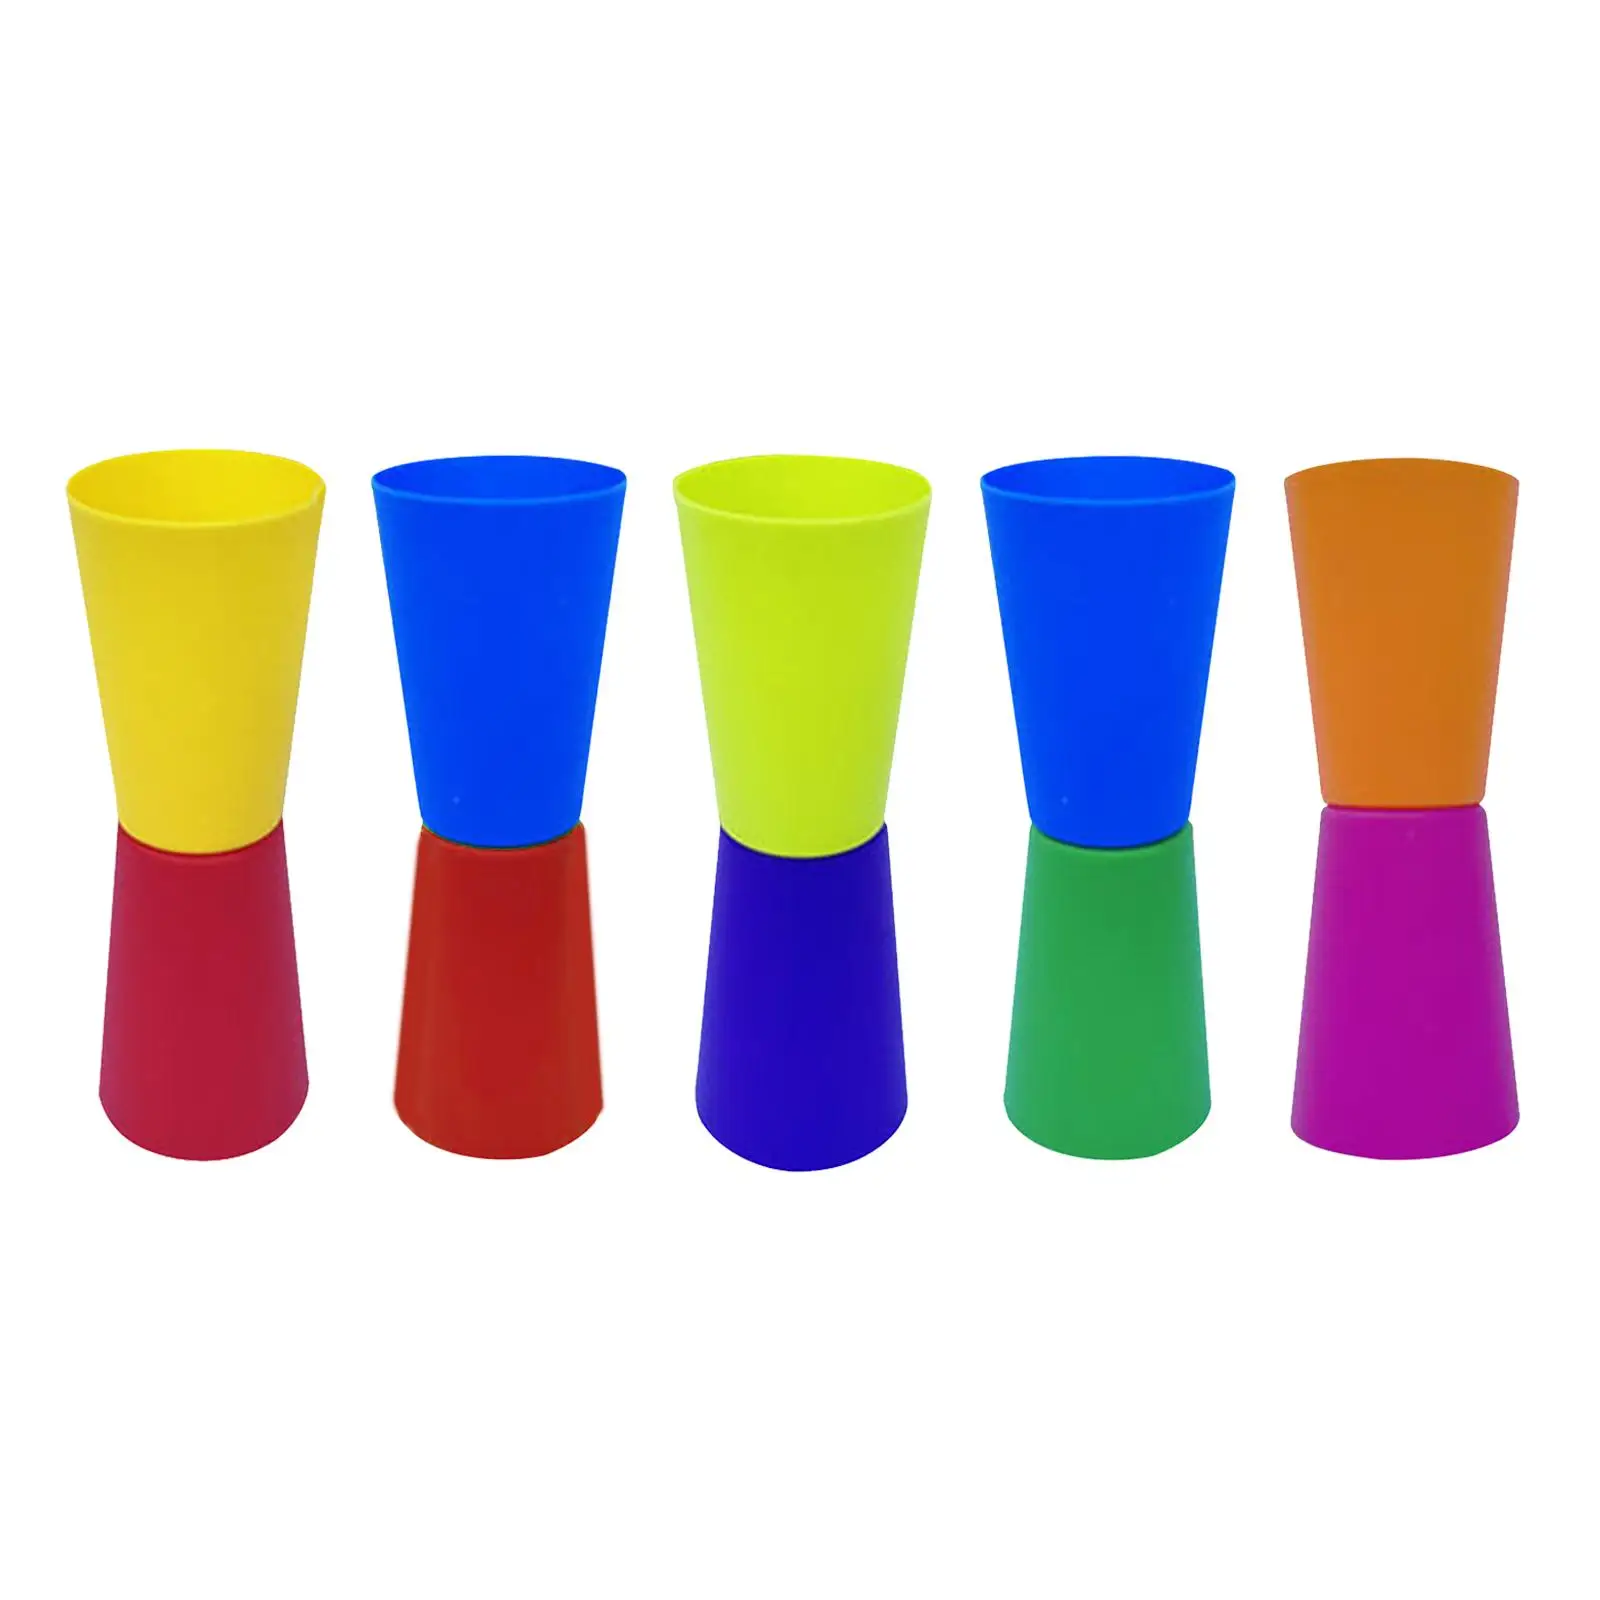 10x Flip Cups Speed Agility Training Running Sport Equipment Fitness Exercise for Gym Football Rugby Basketball with Storage Net